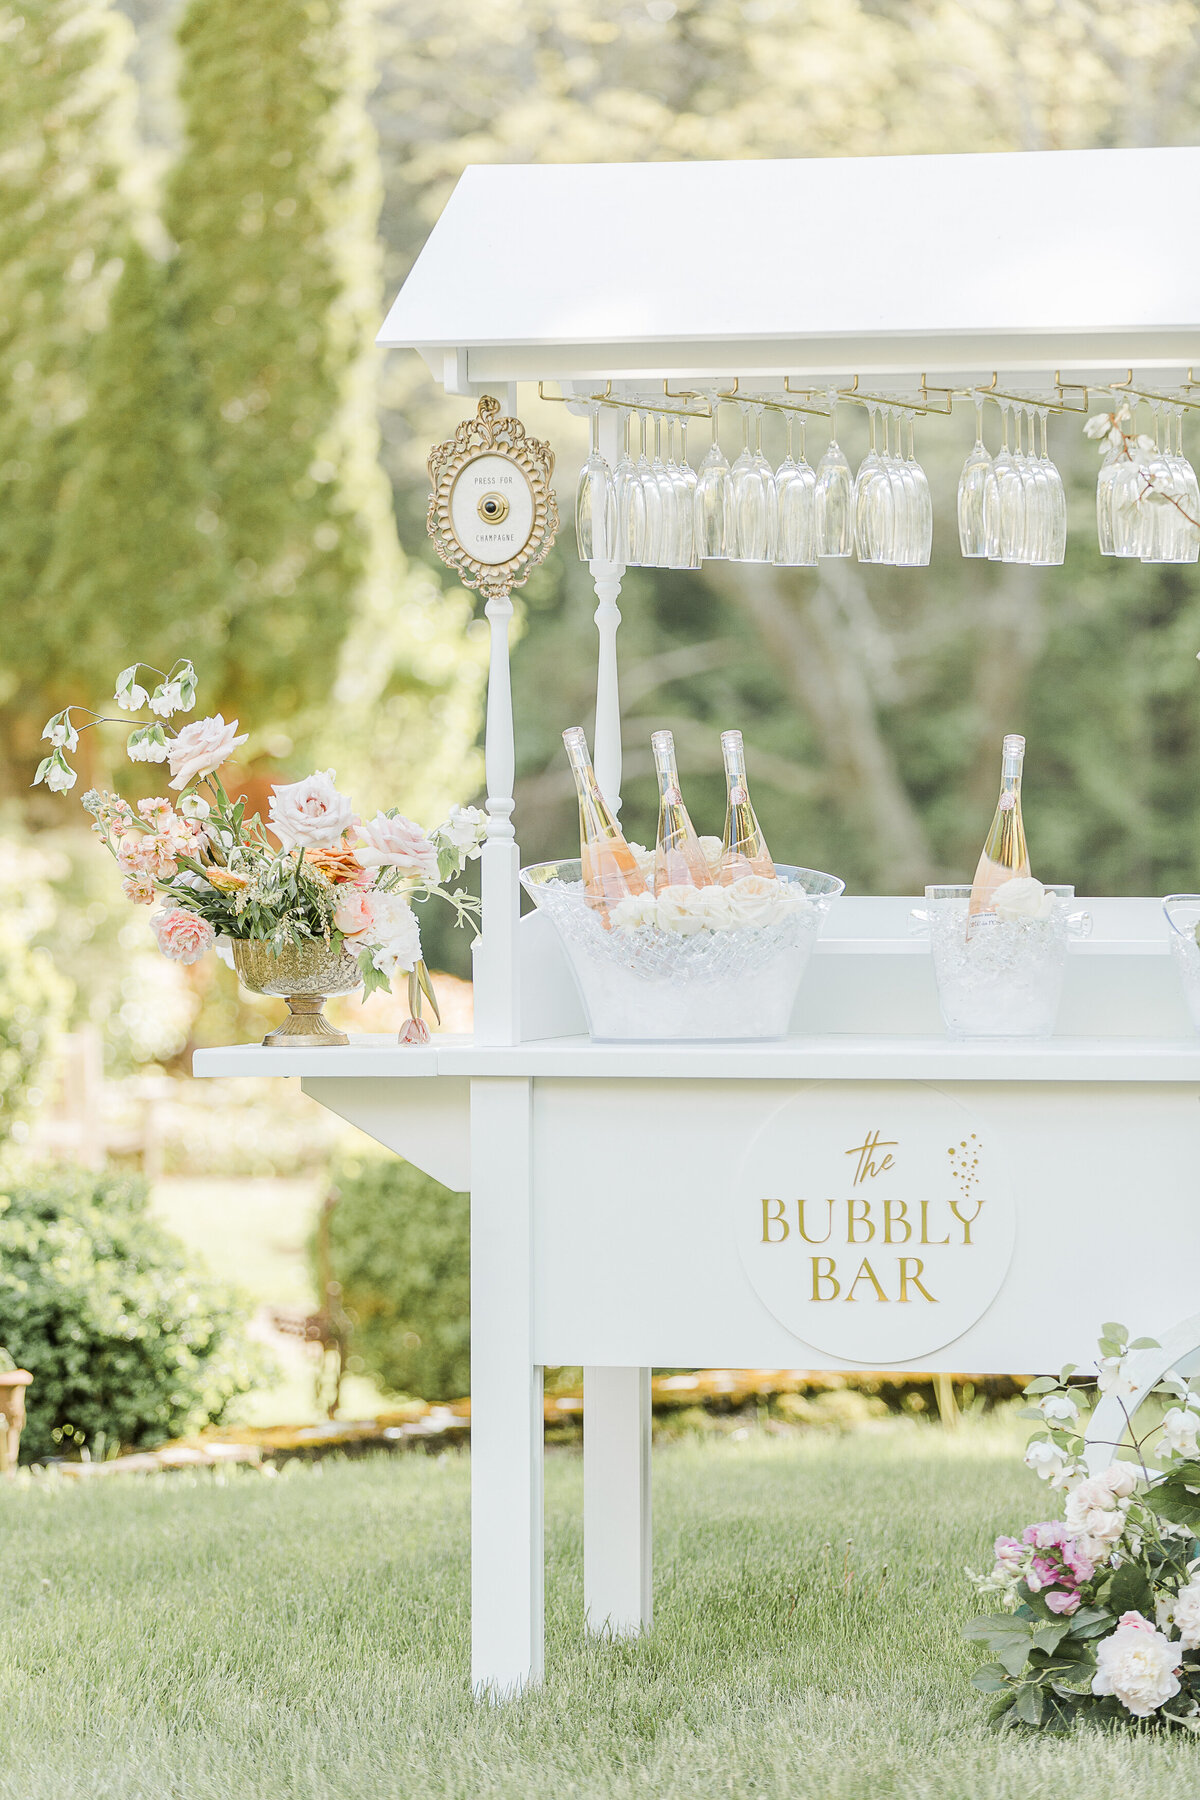 Wedding reception details featuring a Bubbly Bar cart and florals. Captured by Lia Rose Weddings